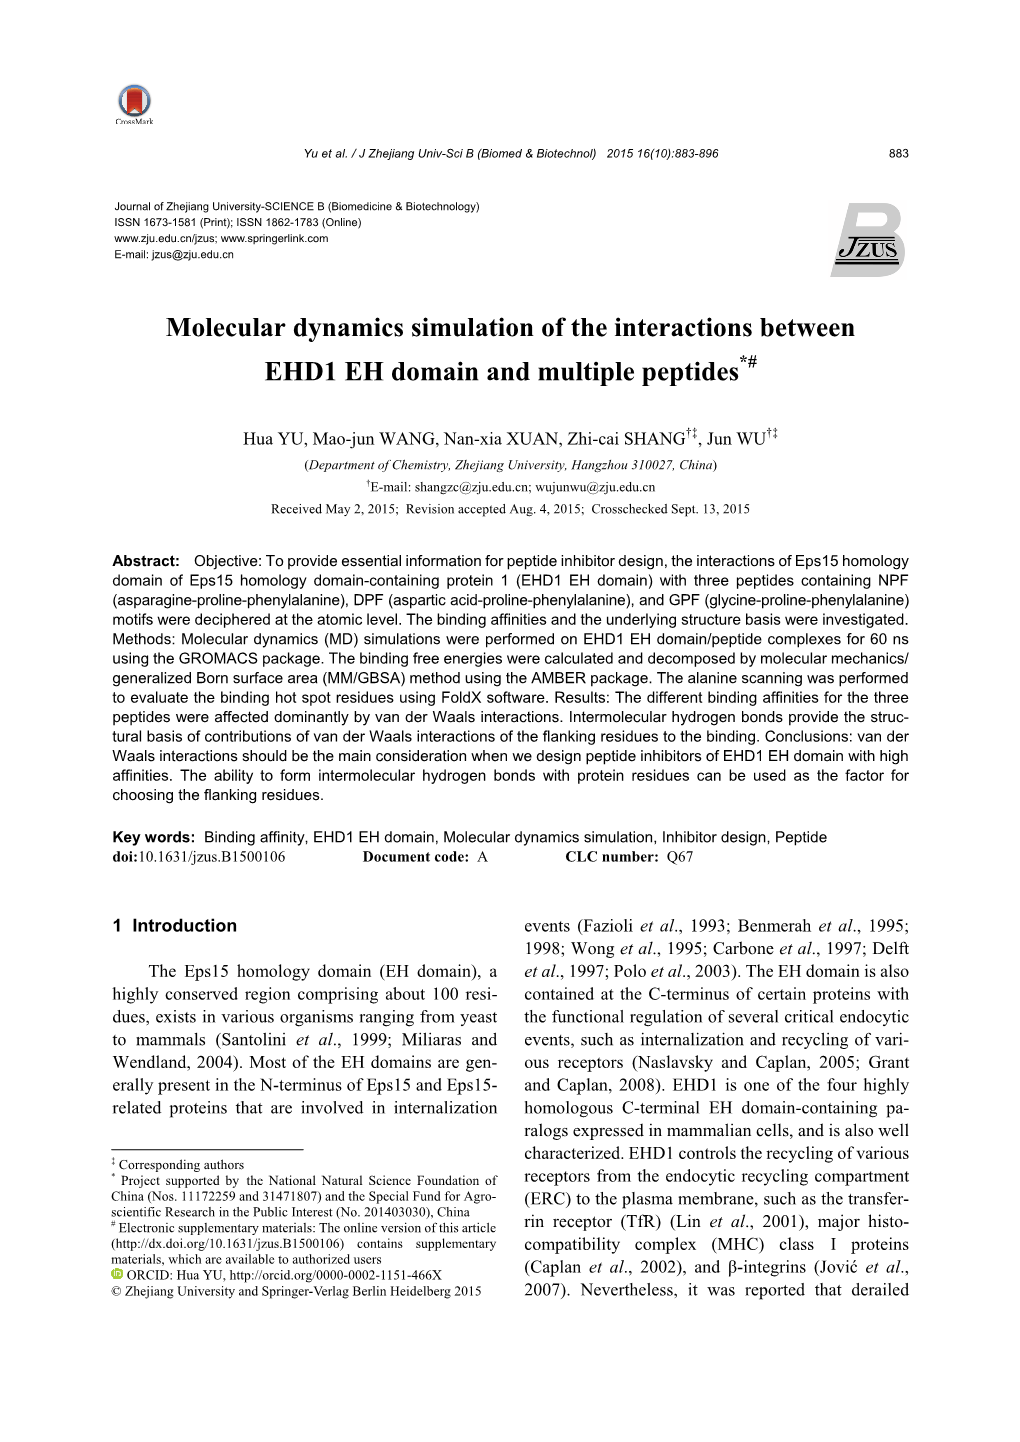 Molecular Dynamics Simulation of the Interactions Between EHD1 EH Domain and Multiple Peptides*